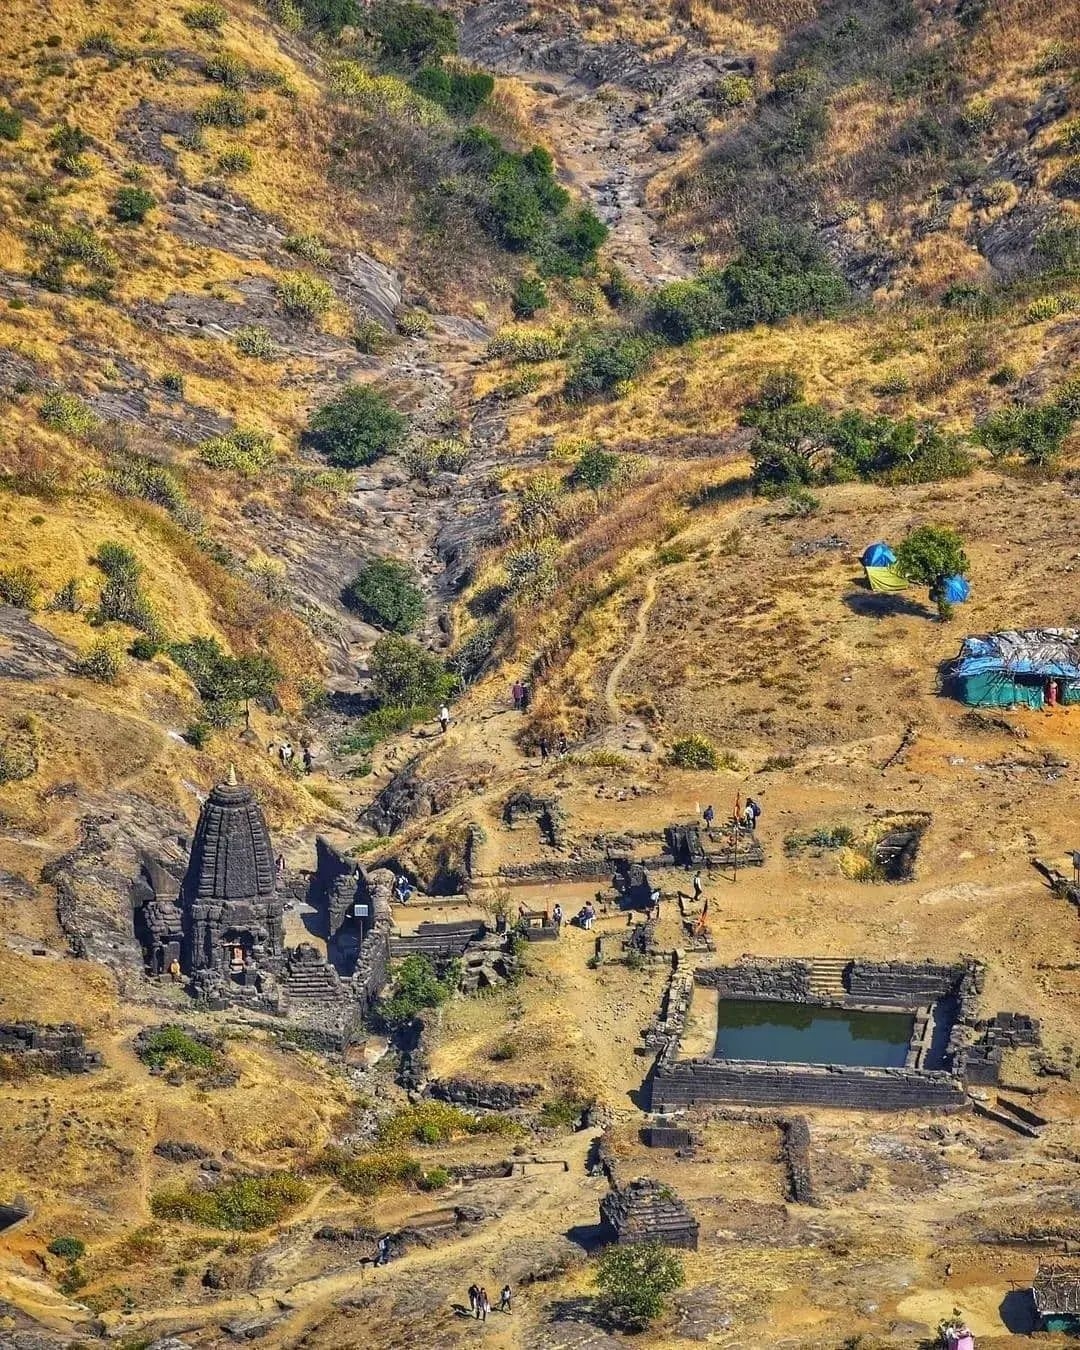 The Hindu Heritage - Harishchandreshwar Temple, located in Harishchandragad  Fort, Maharashtra 🇮🇳 Carved out of a single huge rock, the Temple is a  glorious example of the fine art of carving sculptures